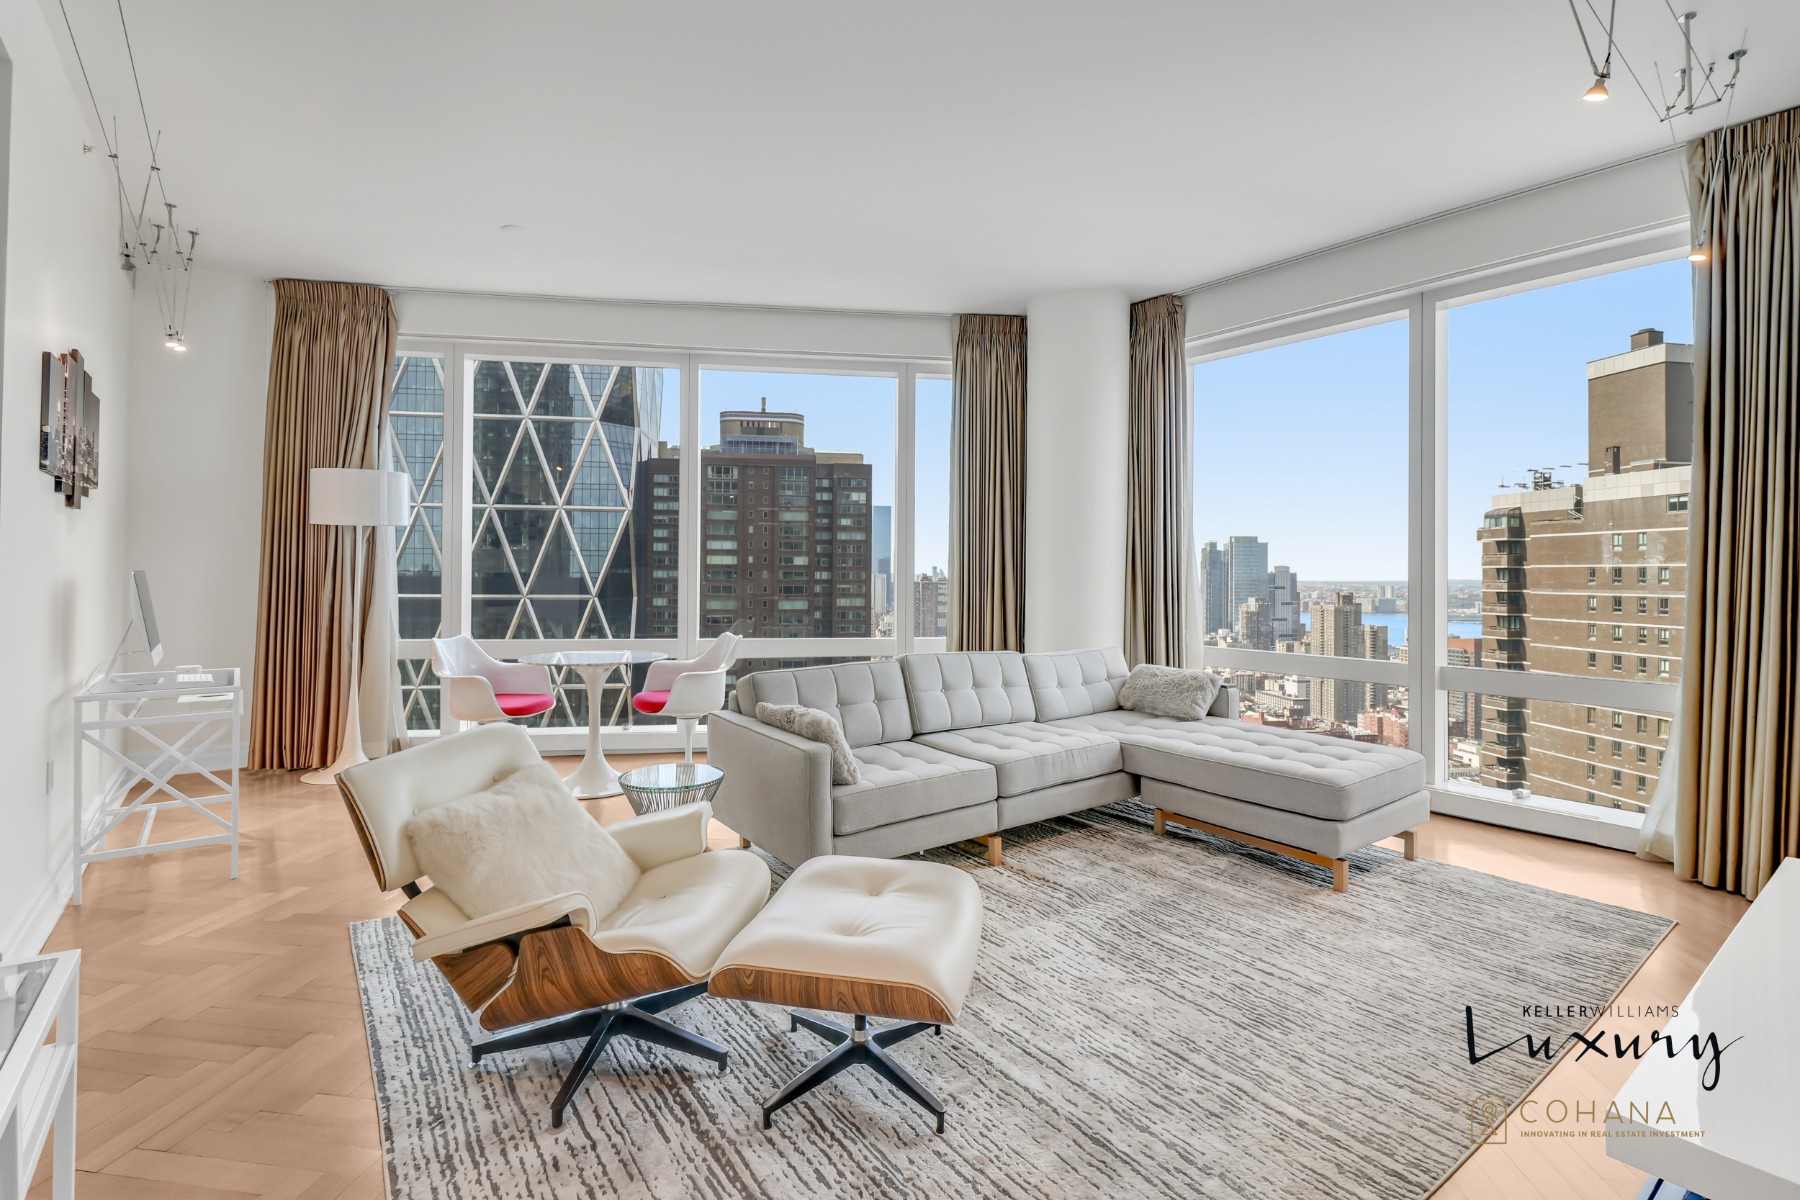 25 Columbus Circle 54E, Chelsea And Clinton, Downtown, NYC - 2 Bedrooms  
2.5 Bathrooms  
4 Rooms - 